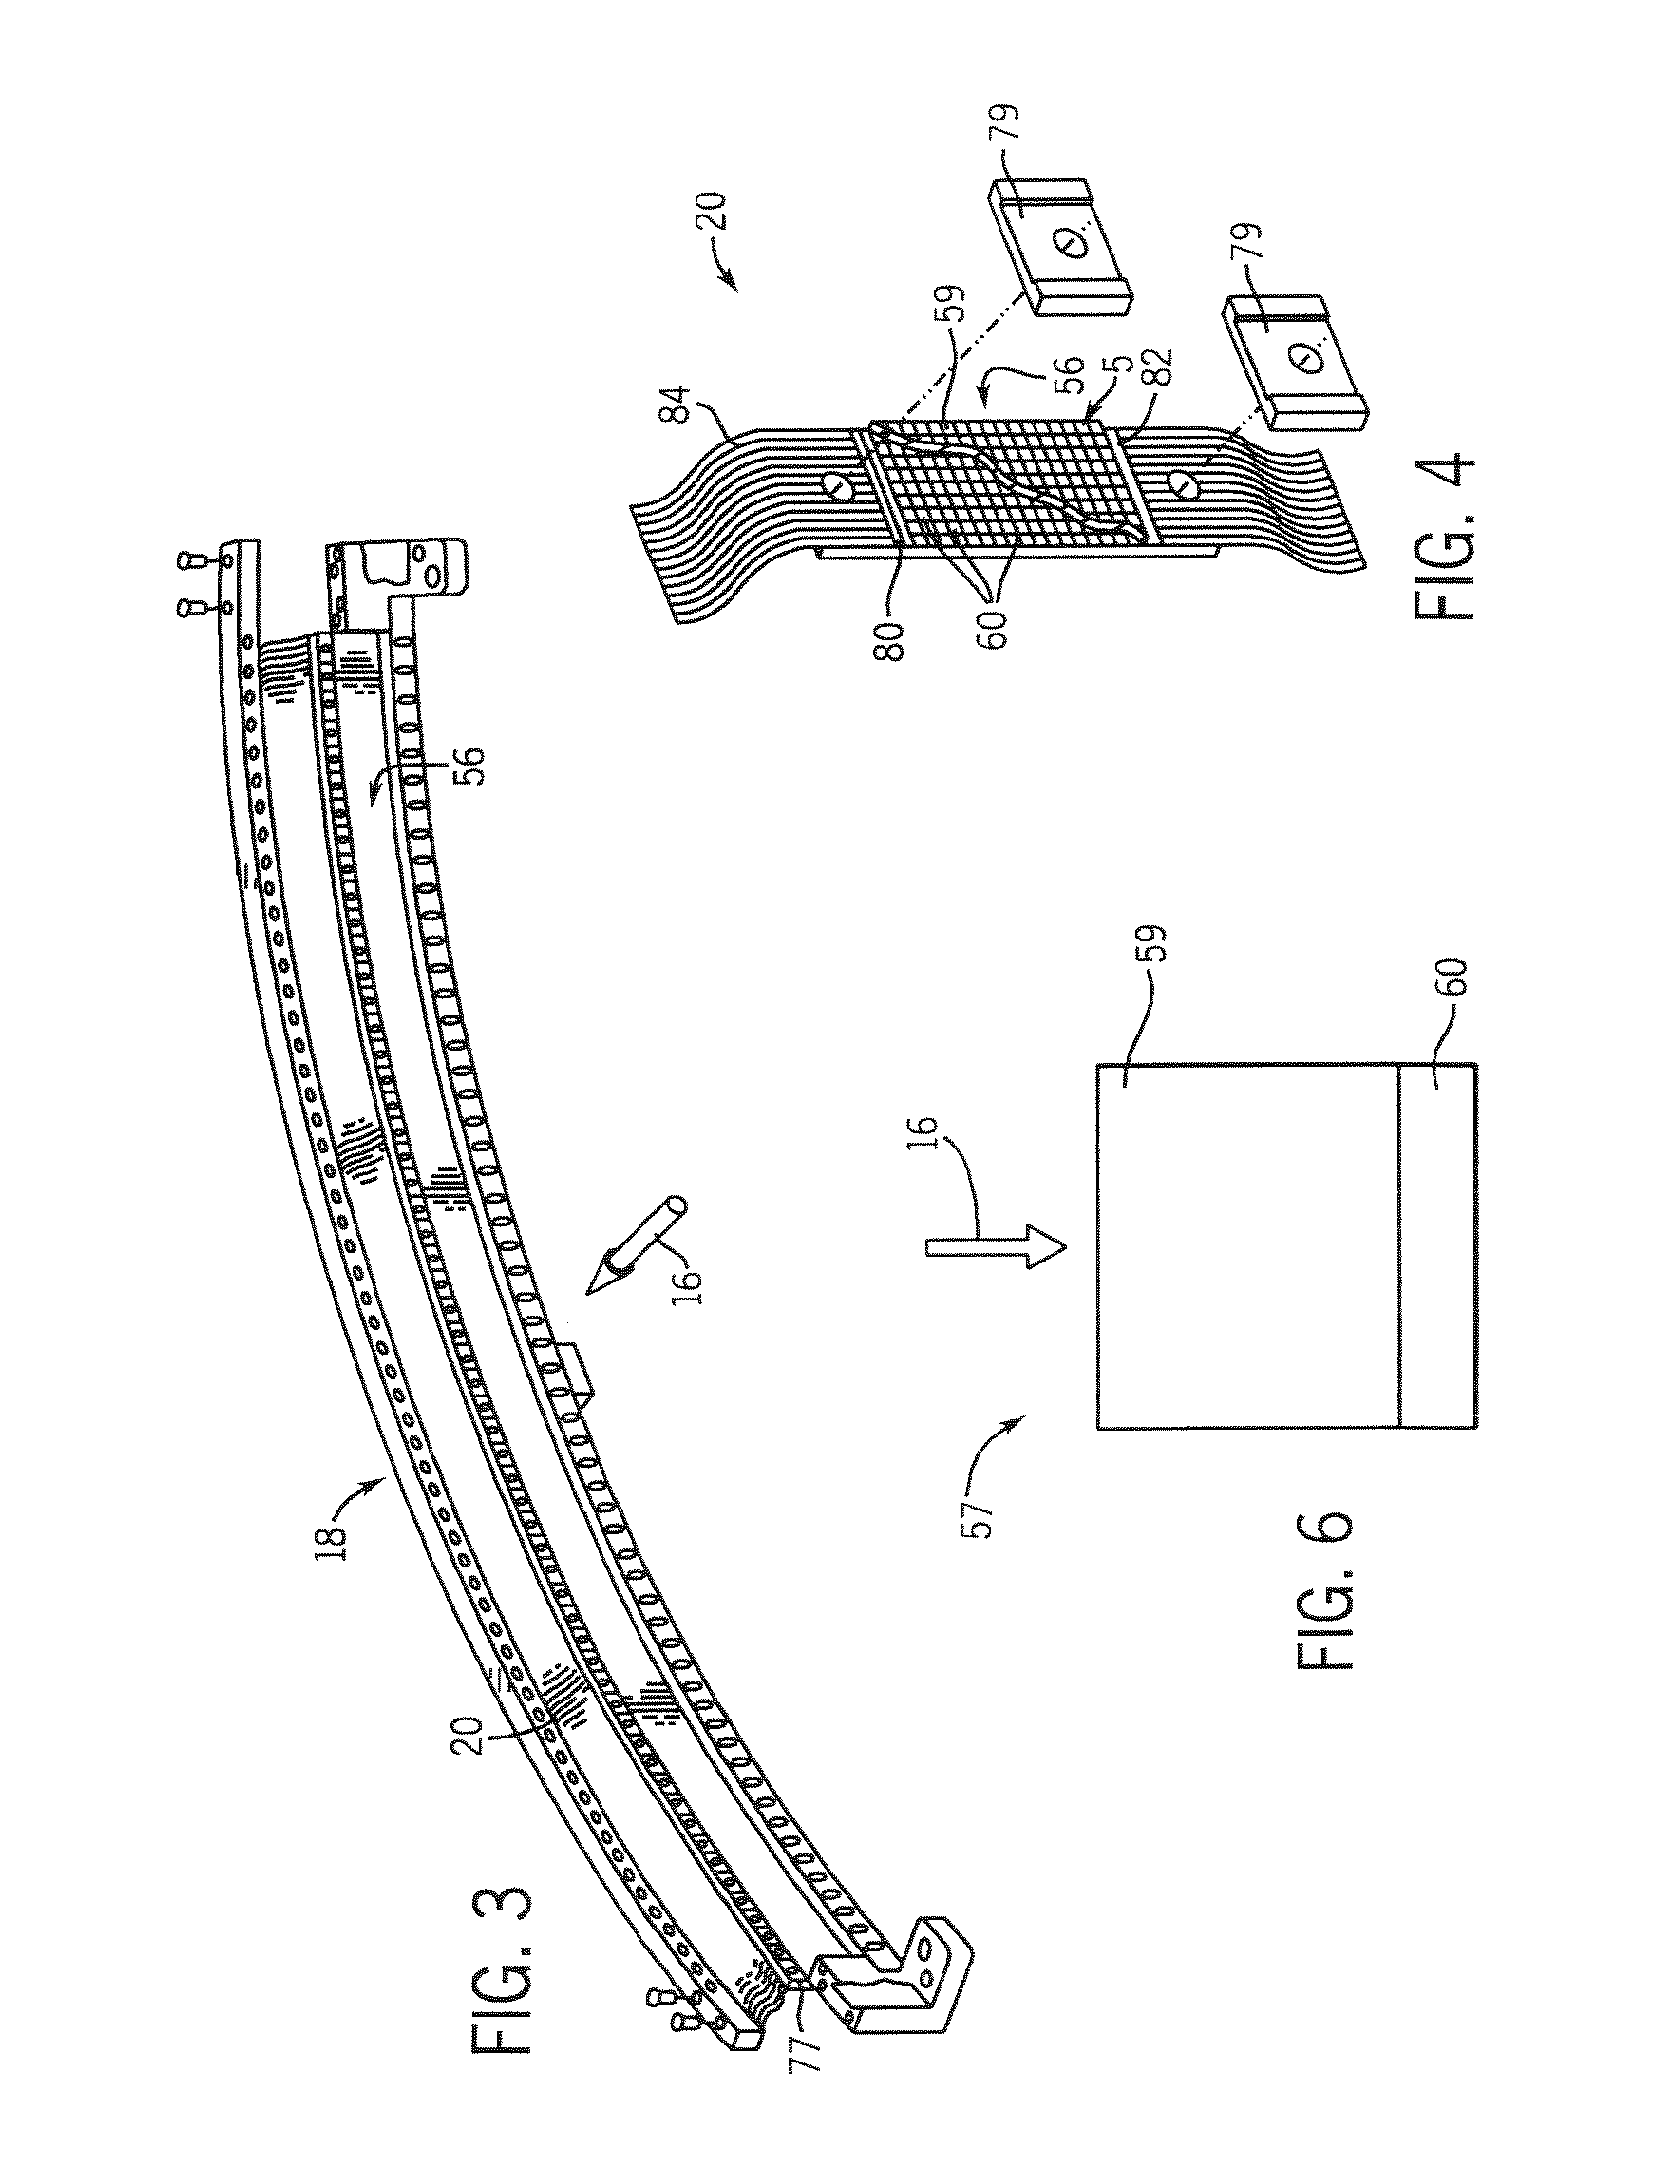 Thermal sensing detector cell for a computed tomography system and method of manufacturing same